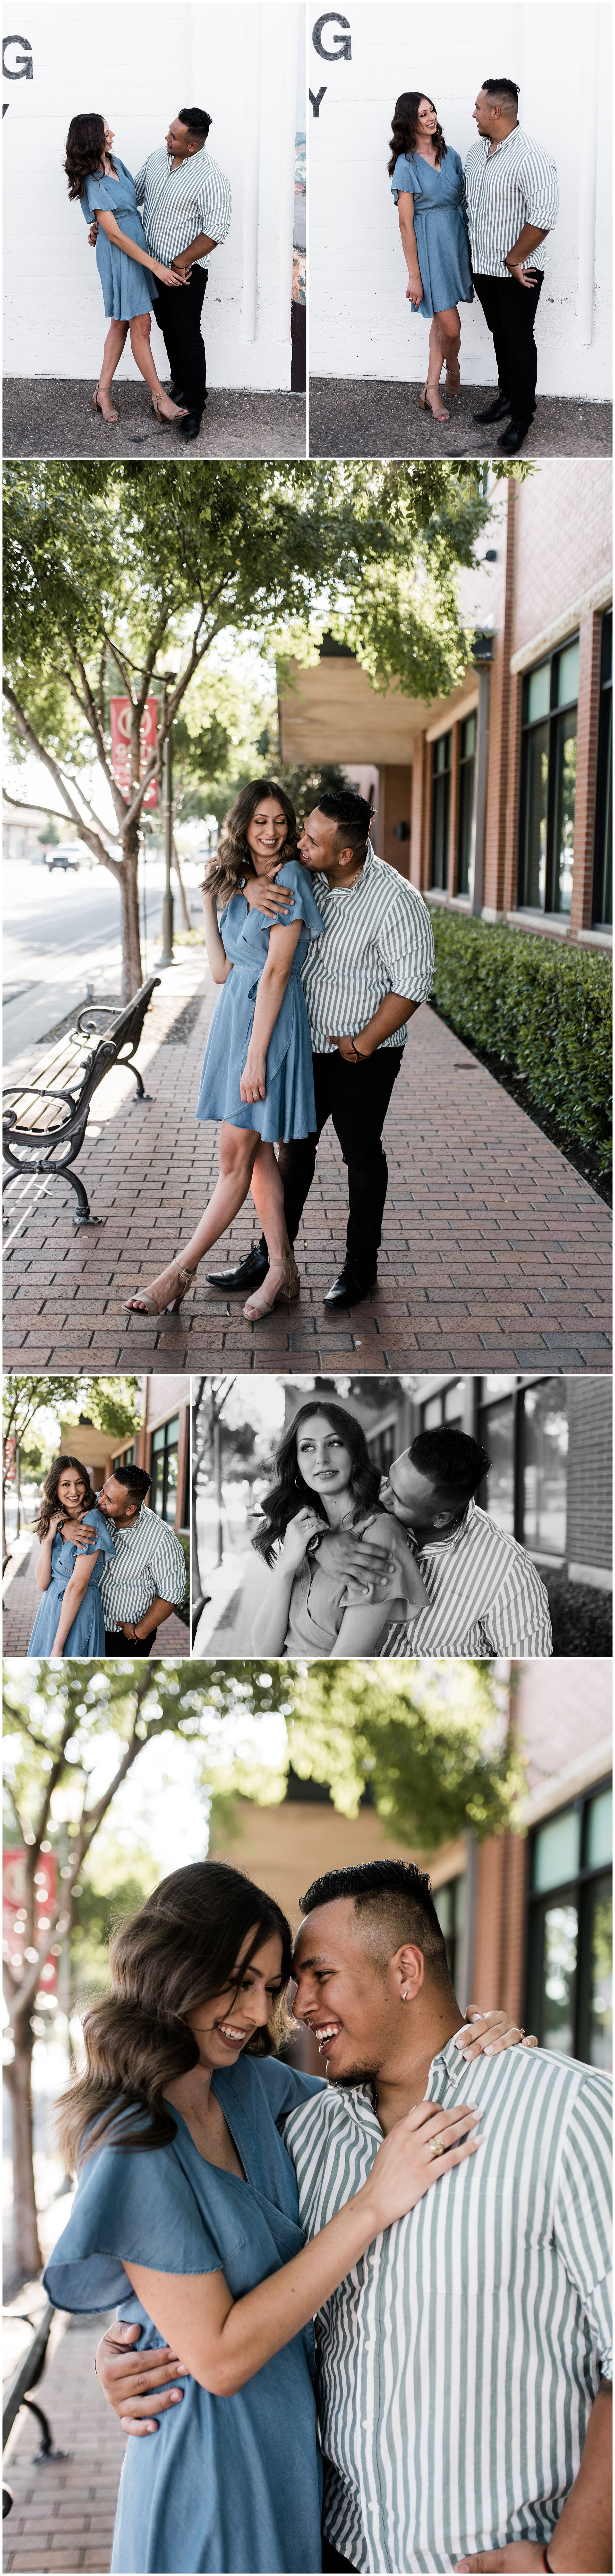  Fort Worth engagement session | Magnolia Avenue engagement session | Fort Worth engagement photographer | www.jordanmitchellphotography.com 